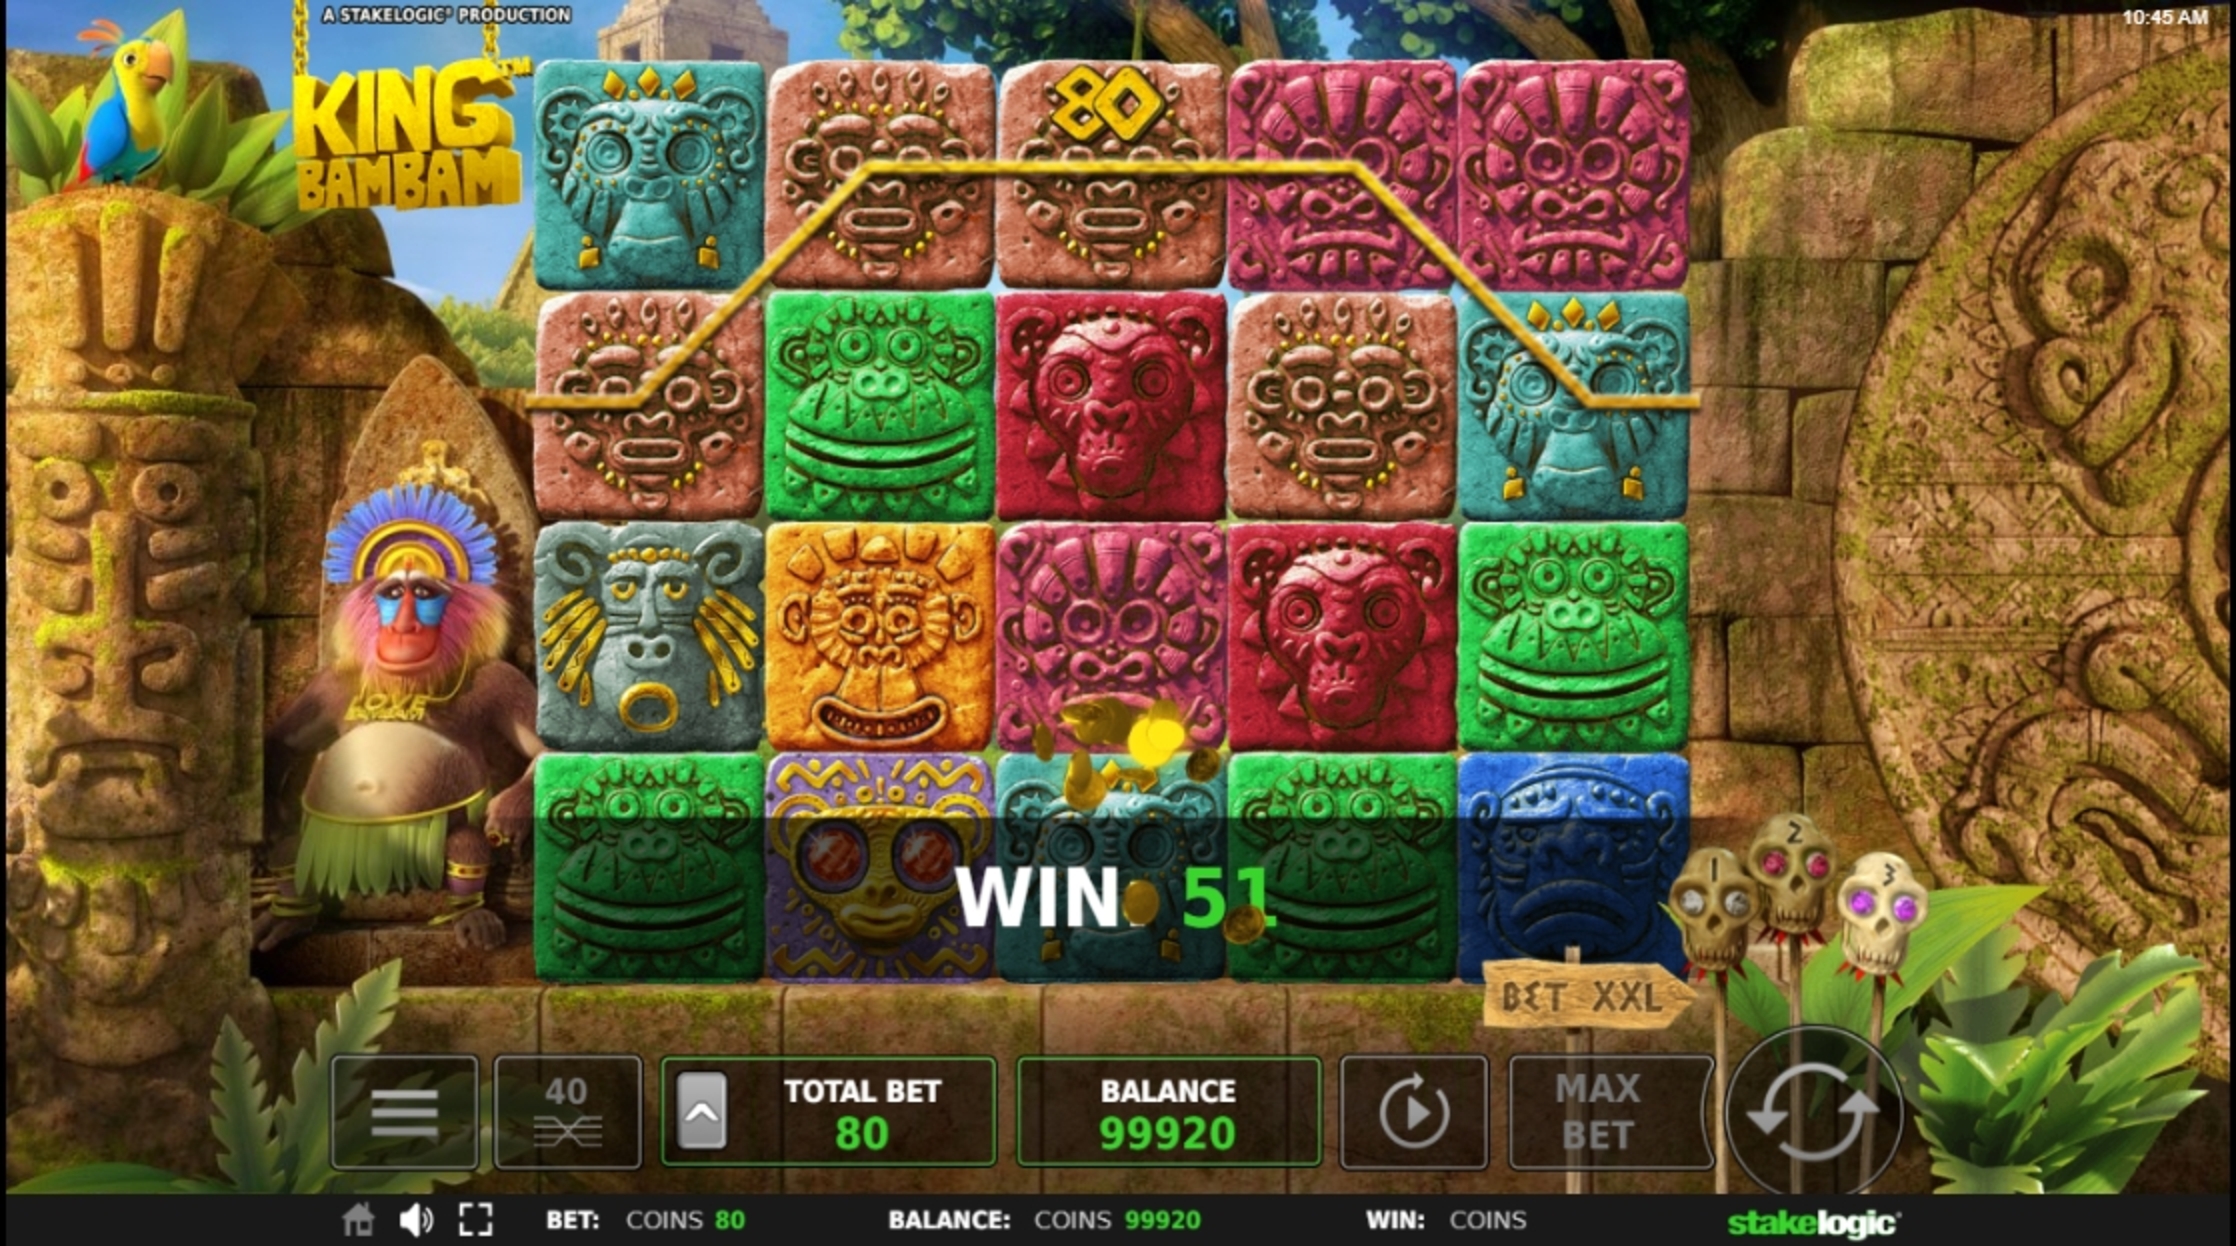 Win Money in King Bam Bam Free Slot Game by Stakelogic